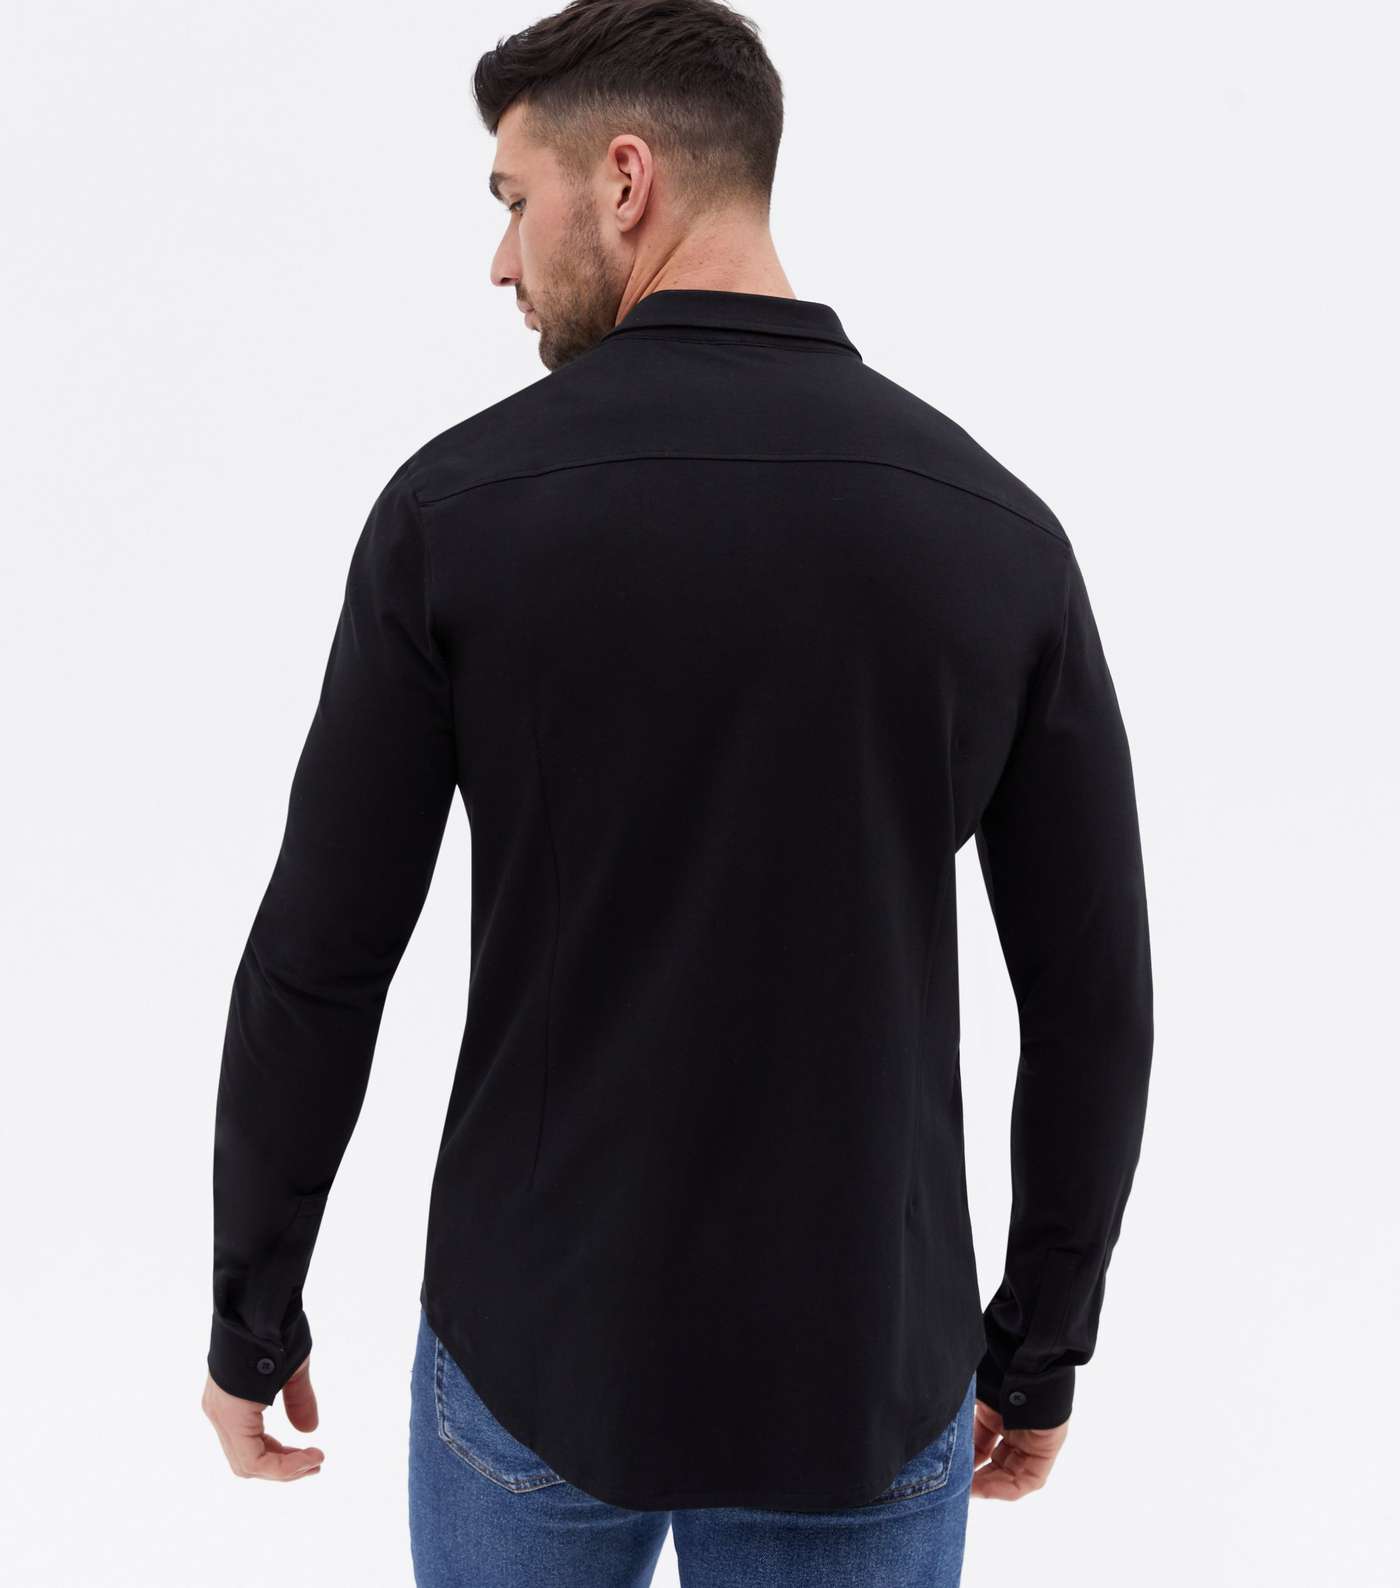 Black Jersey Long Sleeve Muscle Fit Shirt Image 4